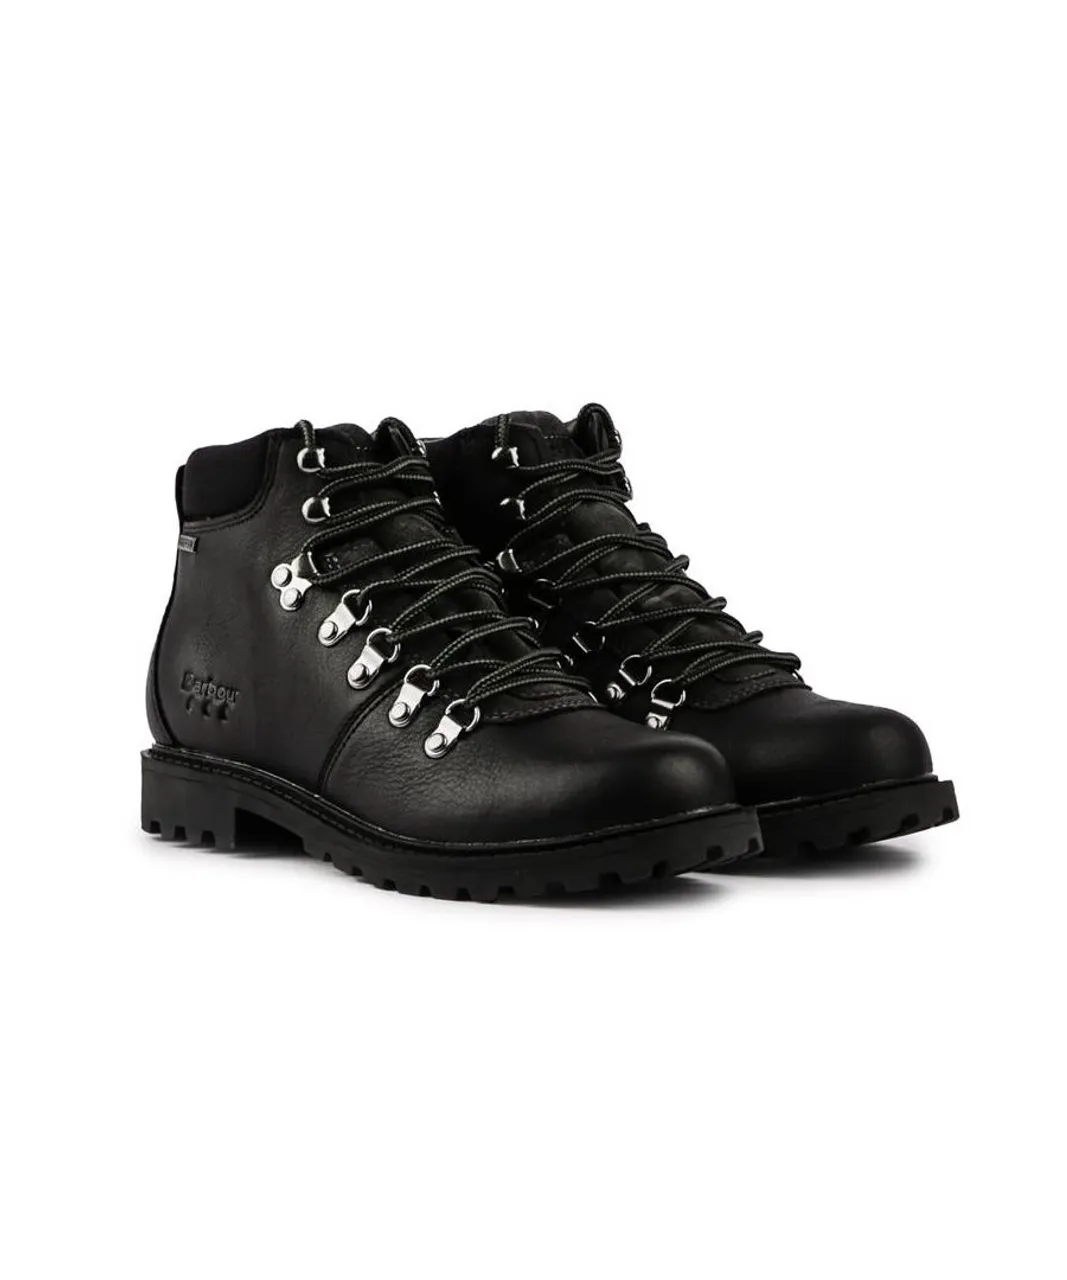 Barbour Womens Fairfield Boots - Black Leather